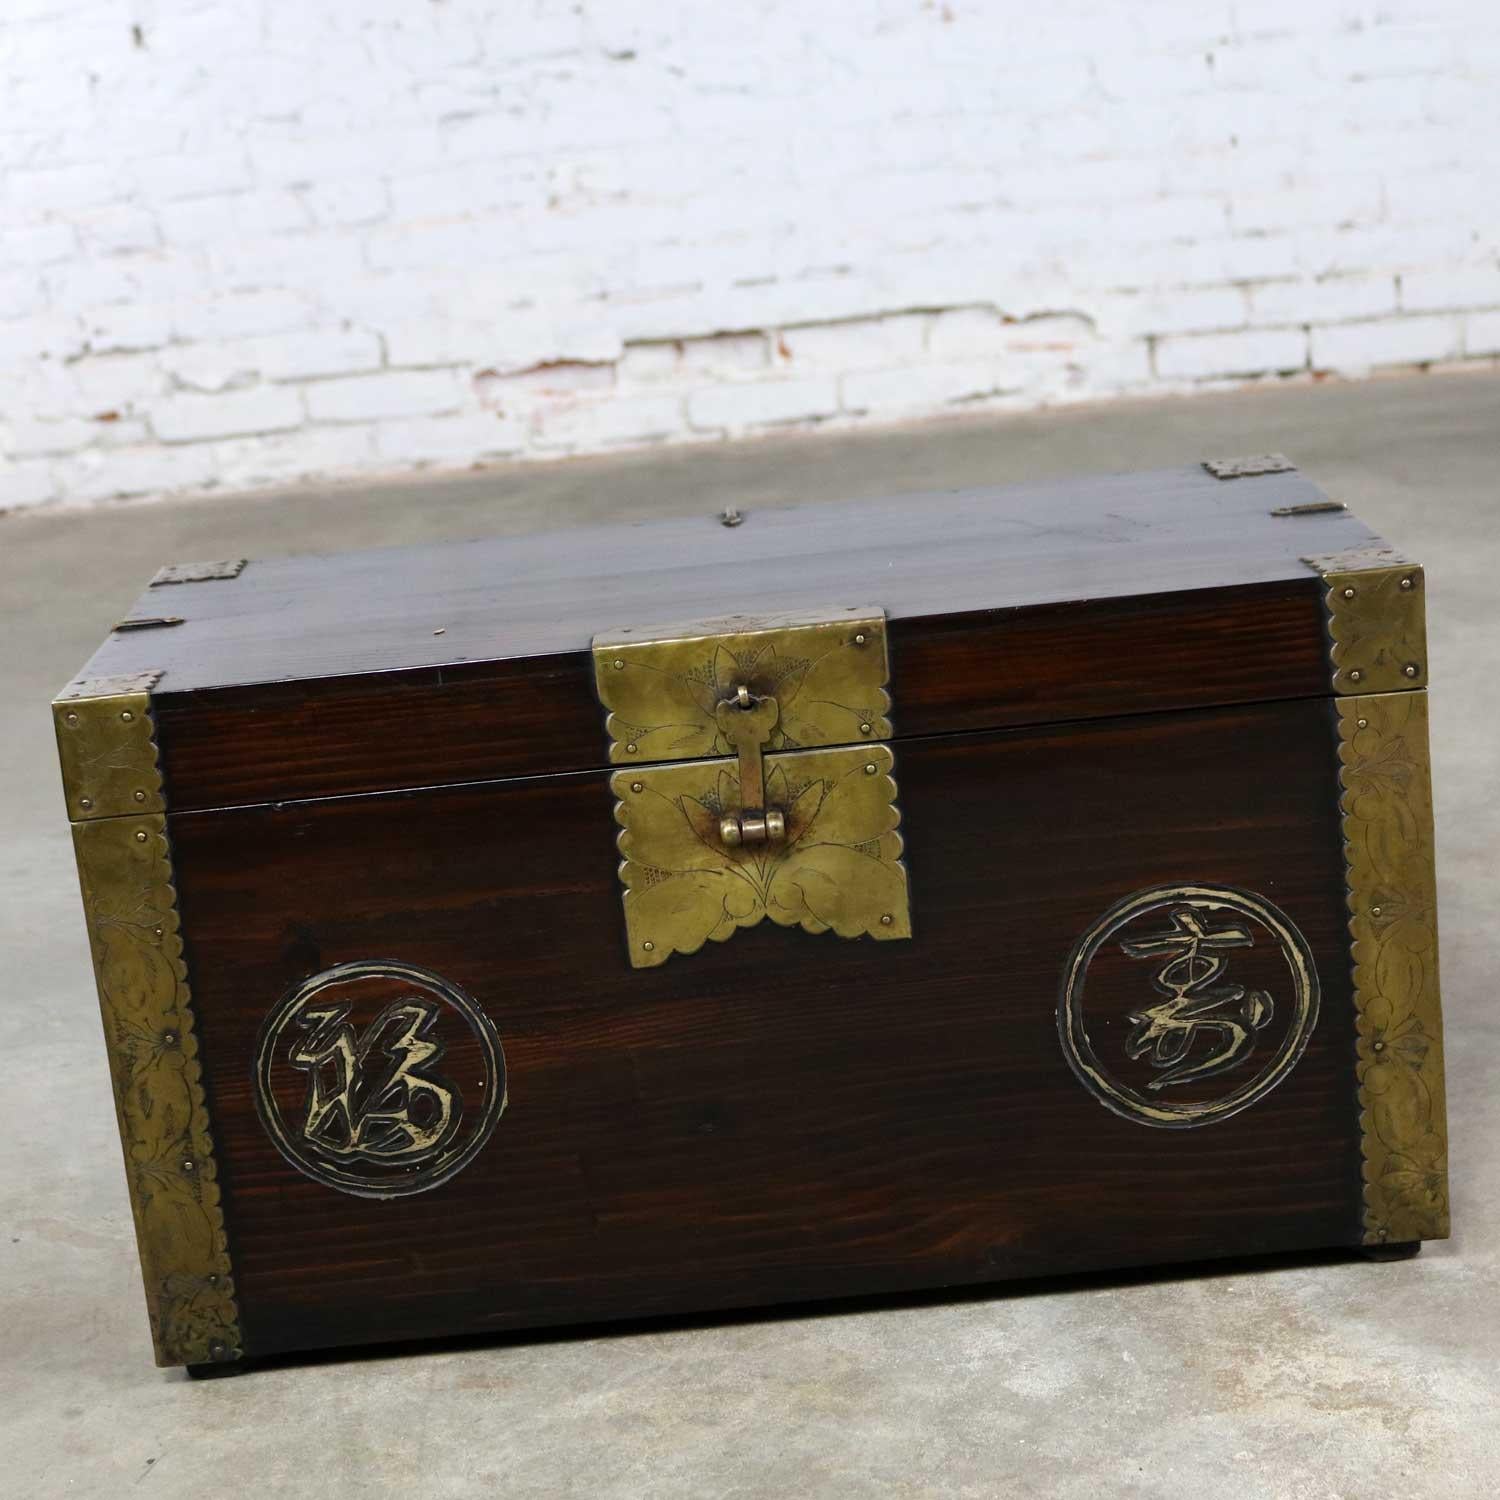 Handsome antique Korean trunk or chest with beautiful brass details and the auspicious Chinese characters for luck and longevity carved into the front. It is in wonderful antique condition with a nice age patina, circa early 20th century most likely